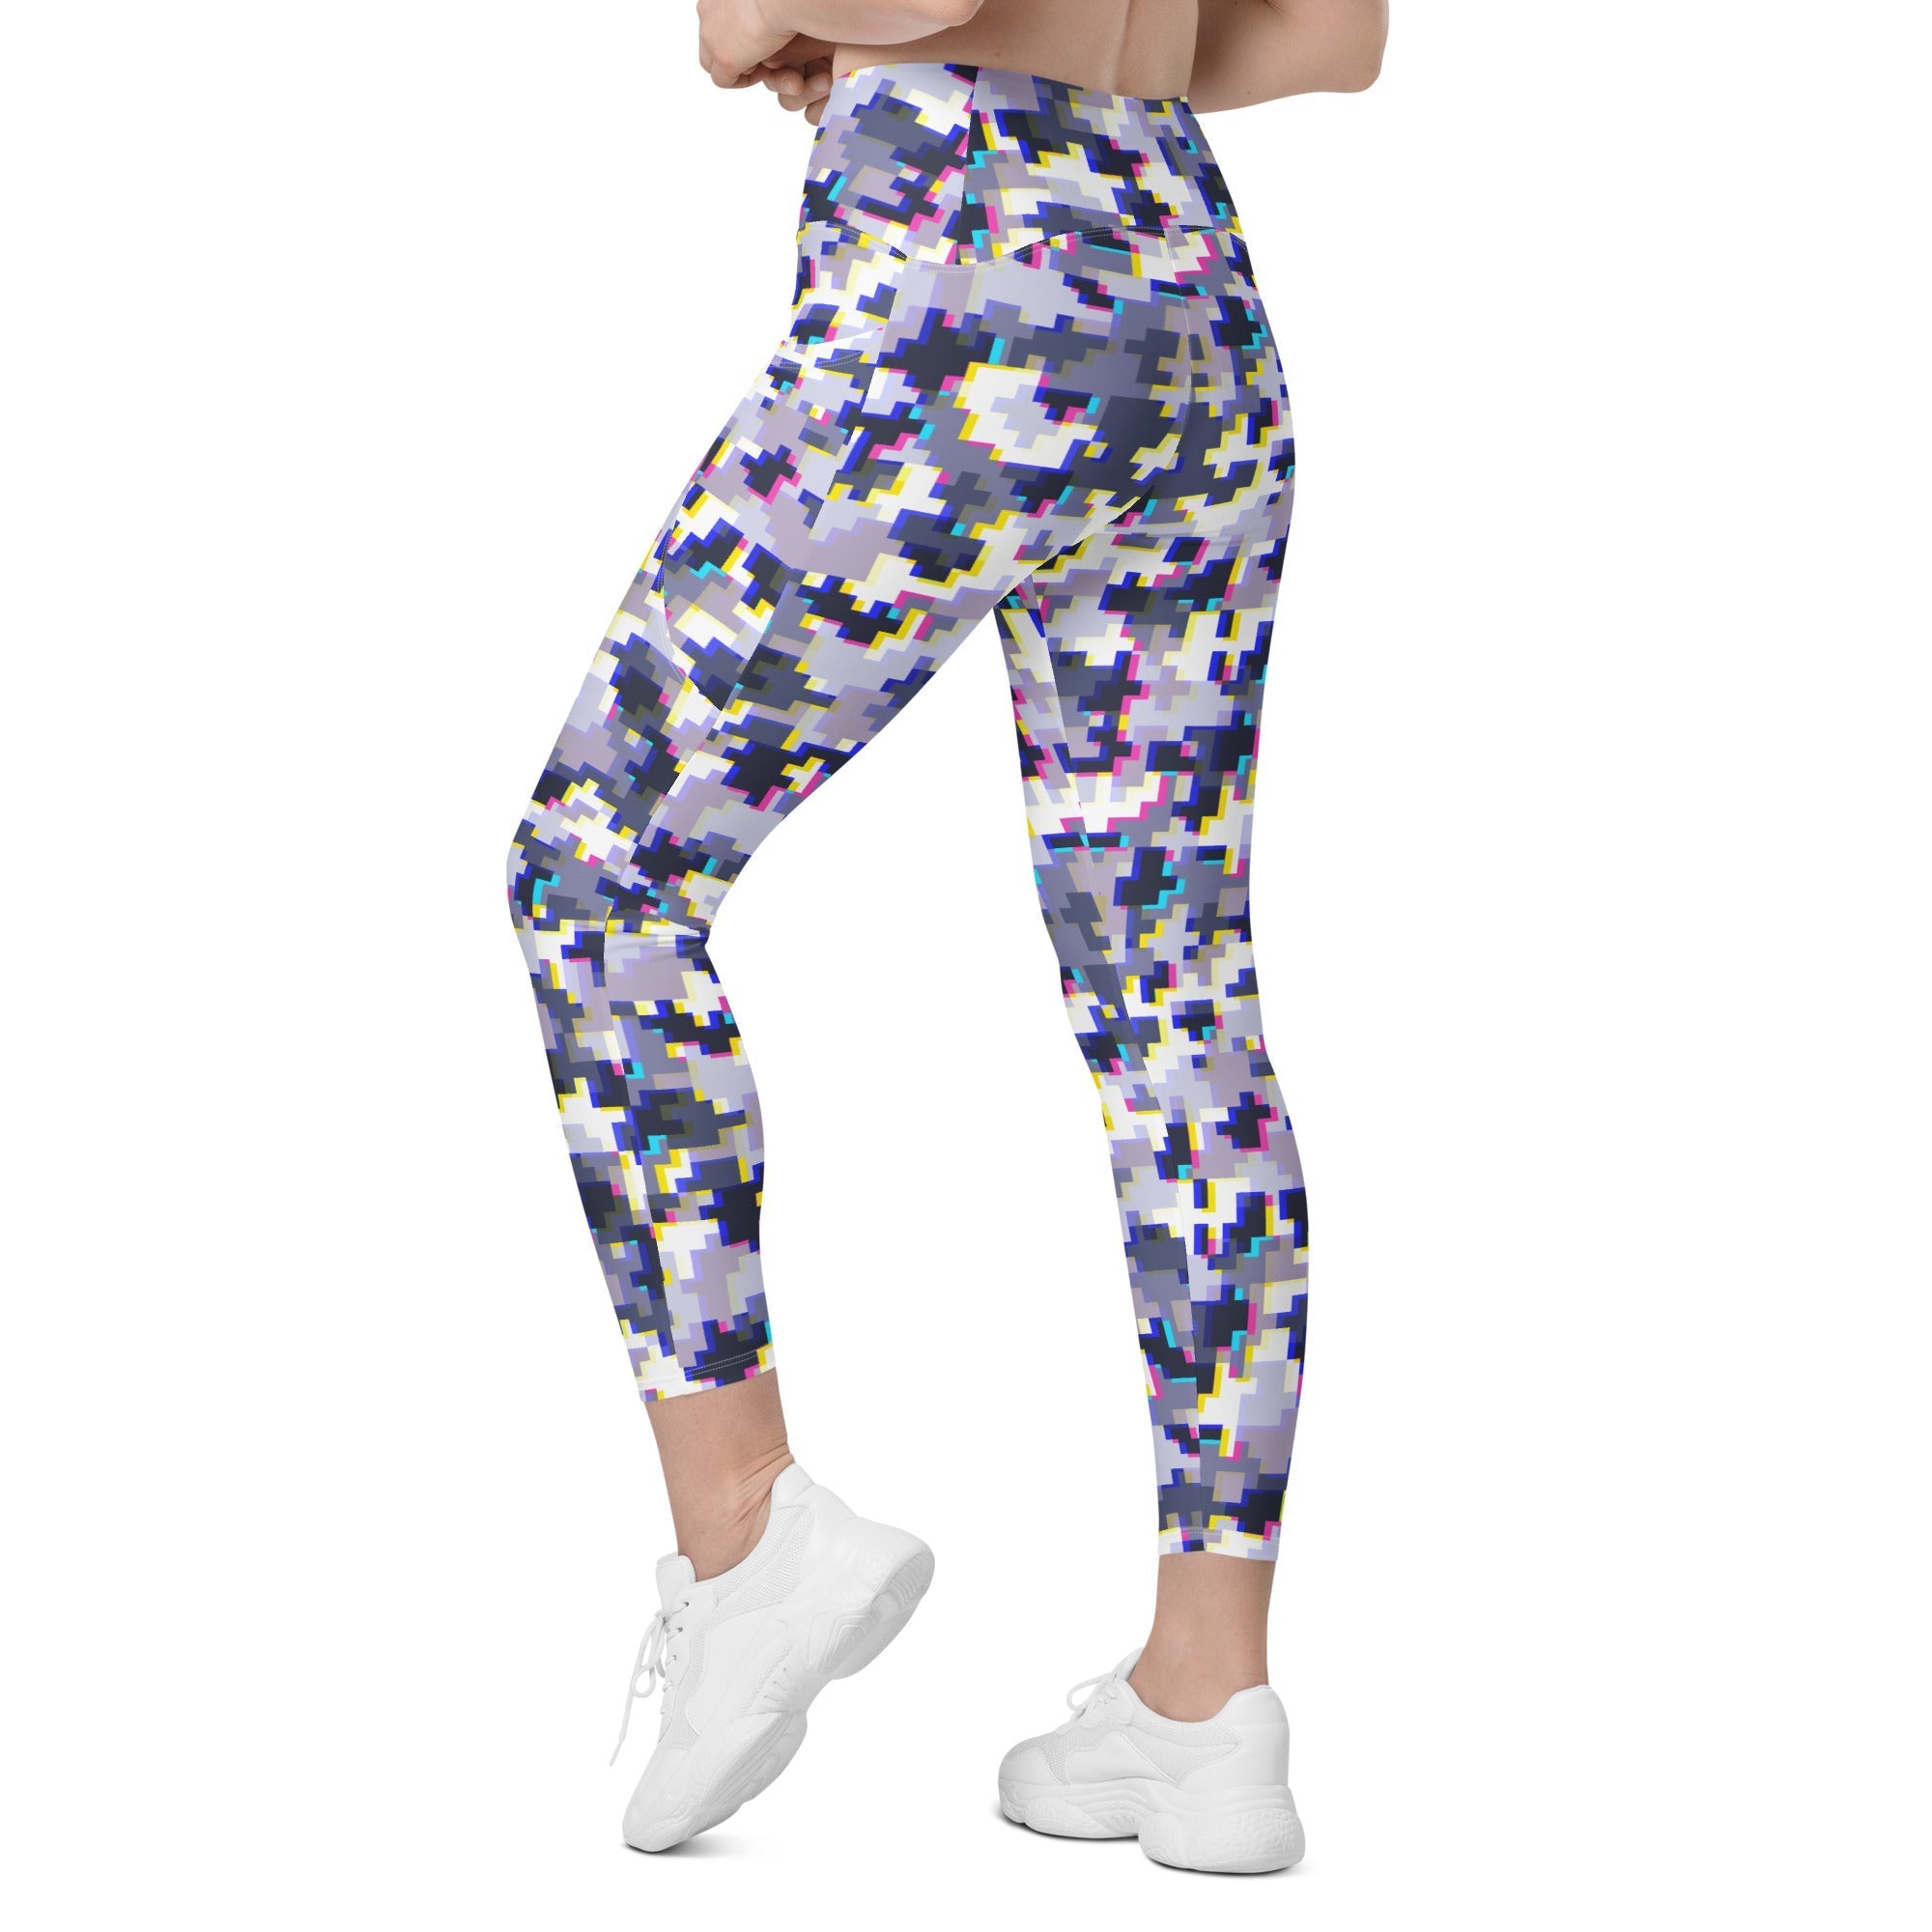 Glitchy Camo Leggings With Pockets